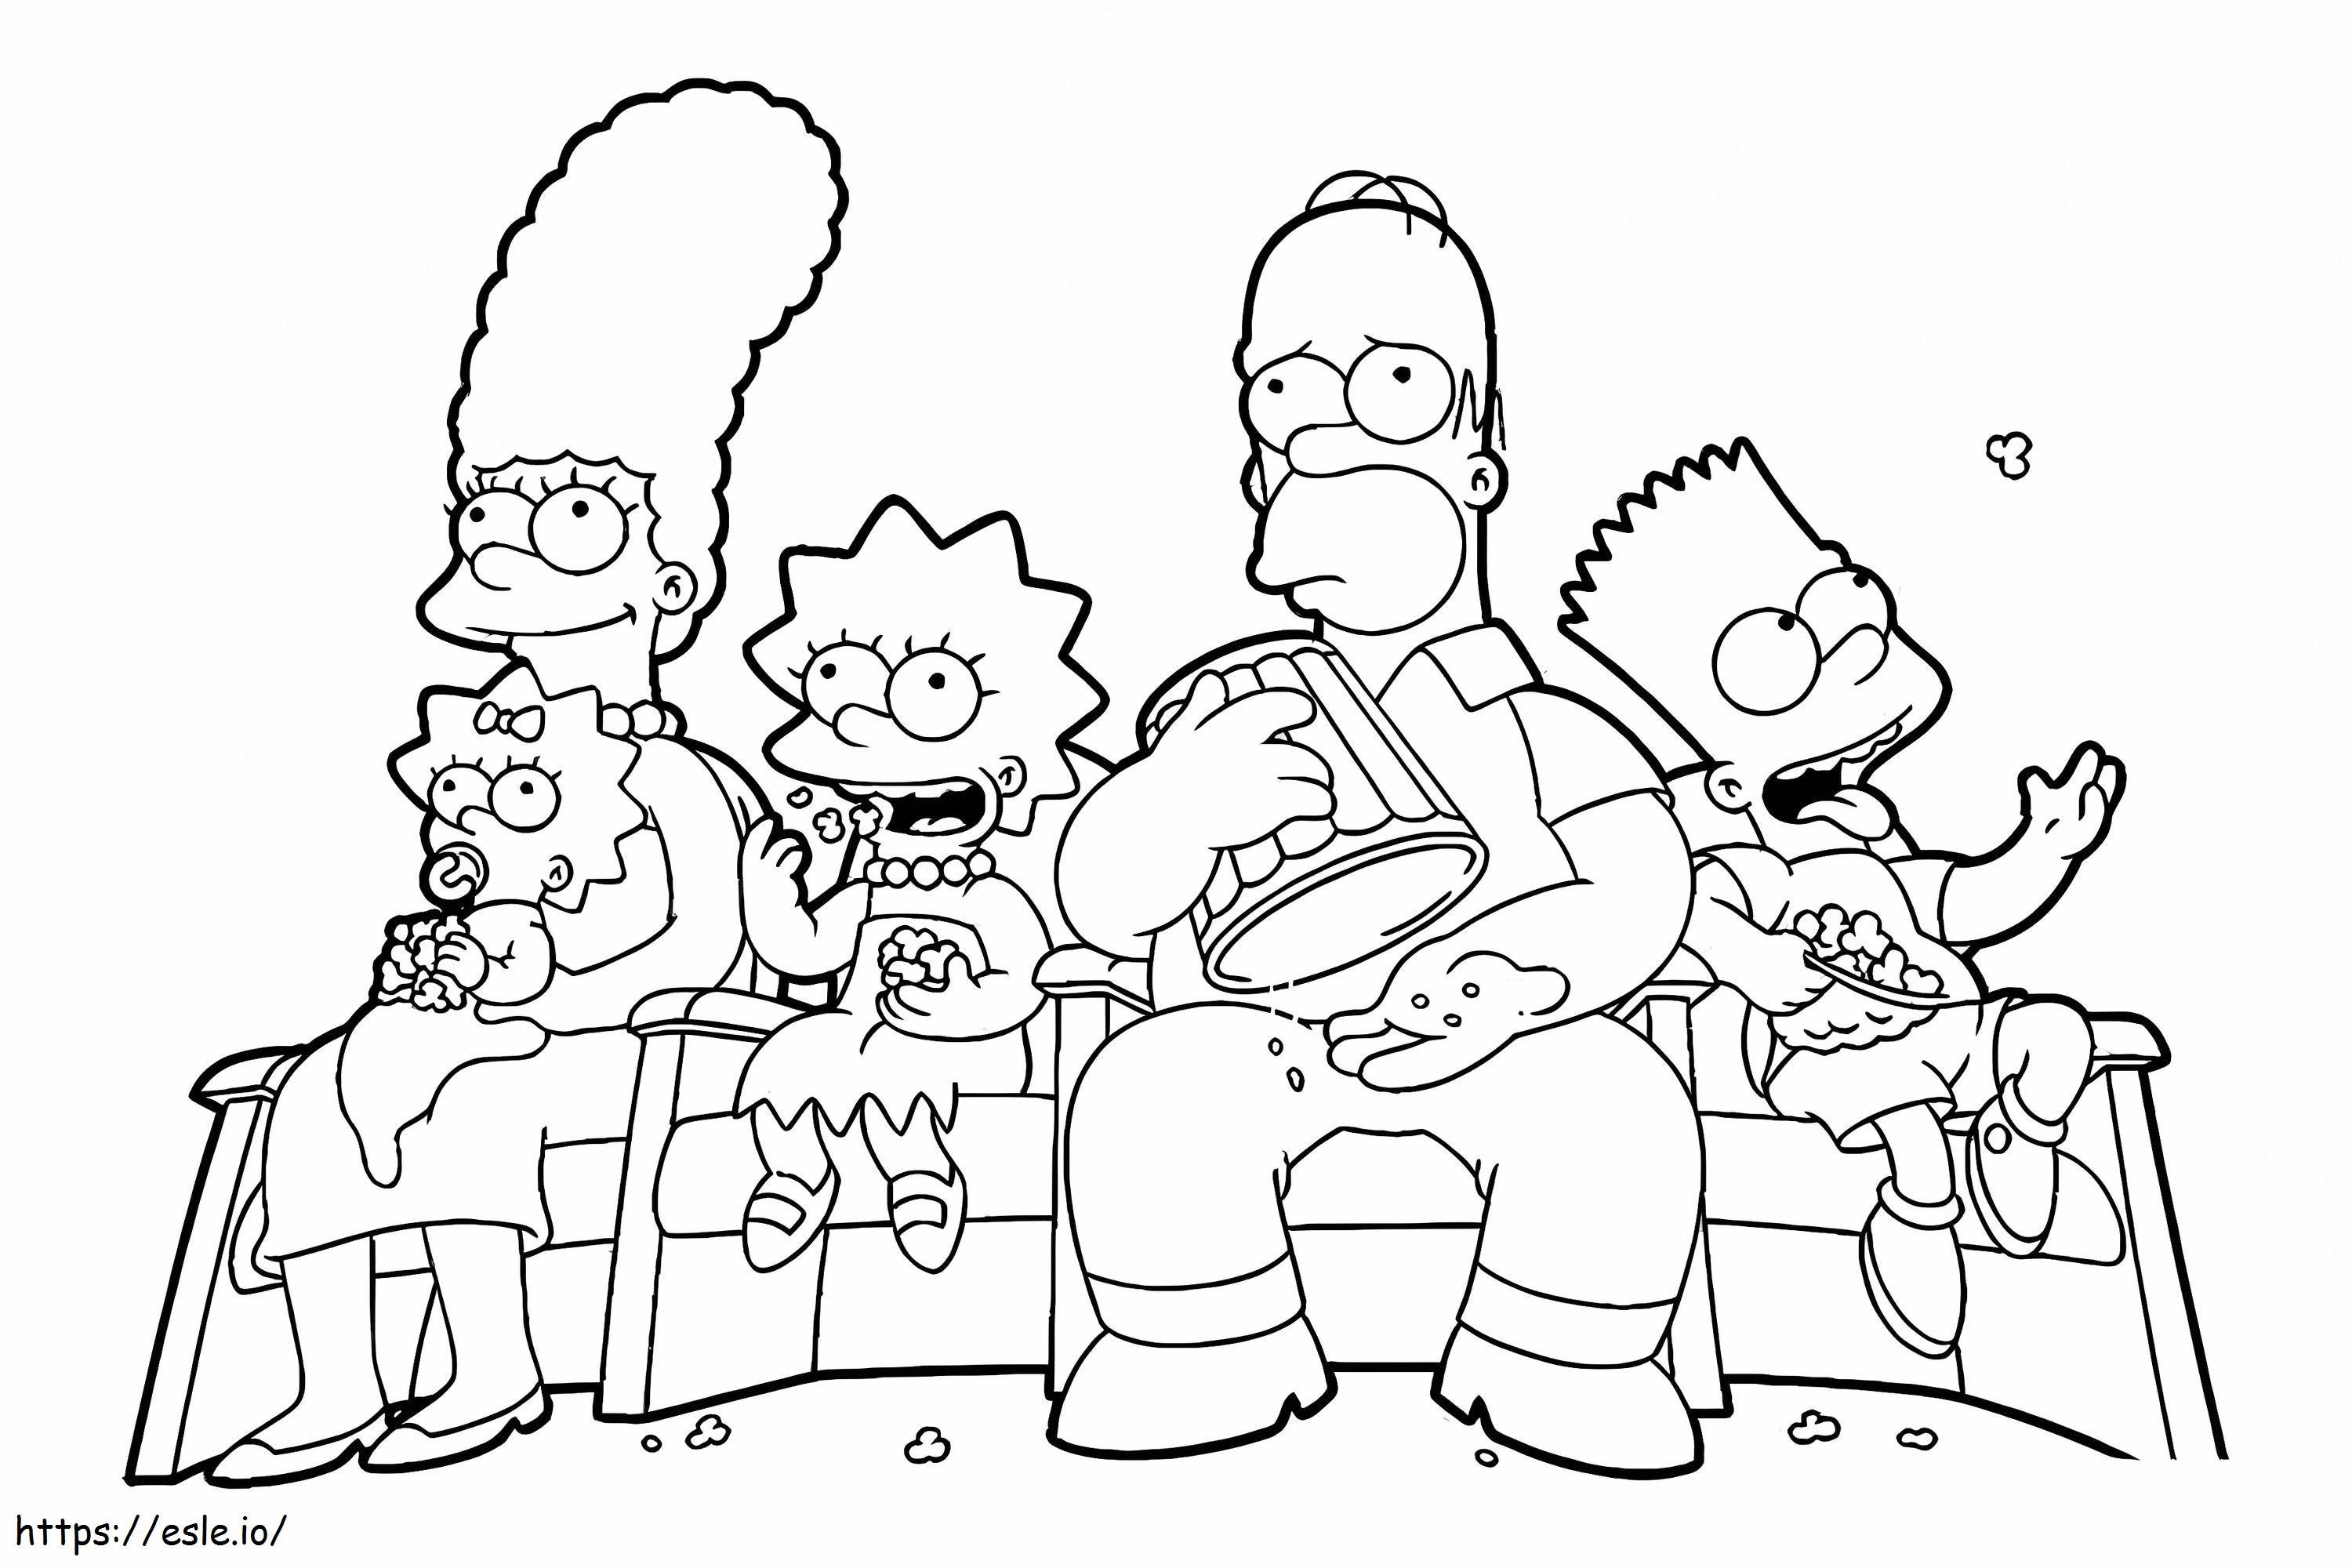 Simpsons Family Watching The Movie coloring page